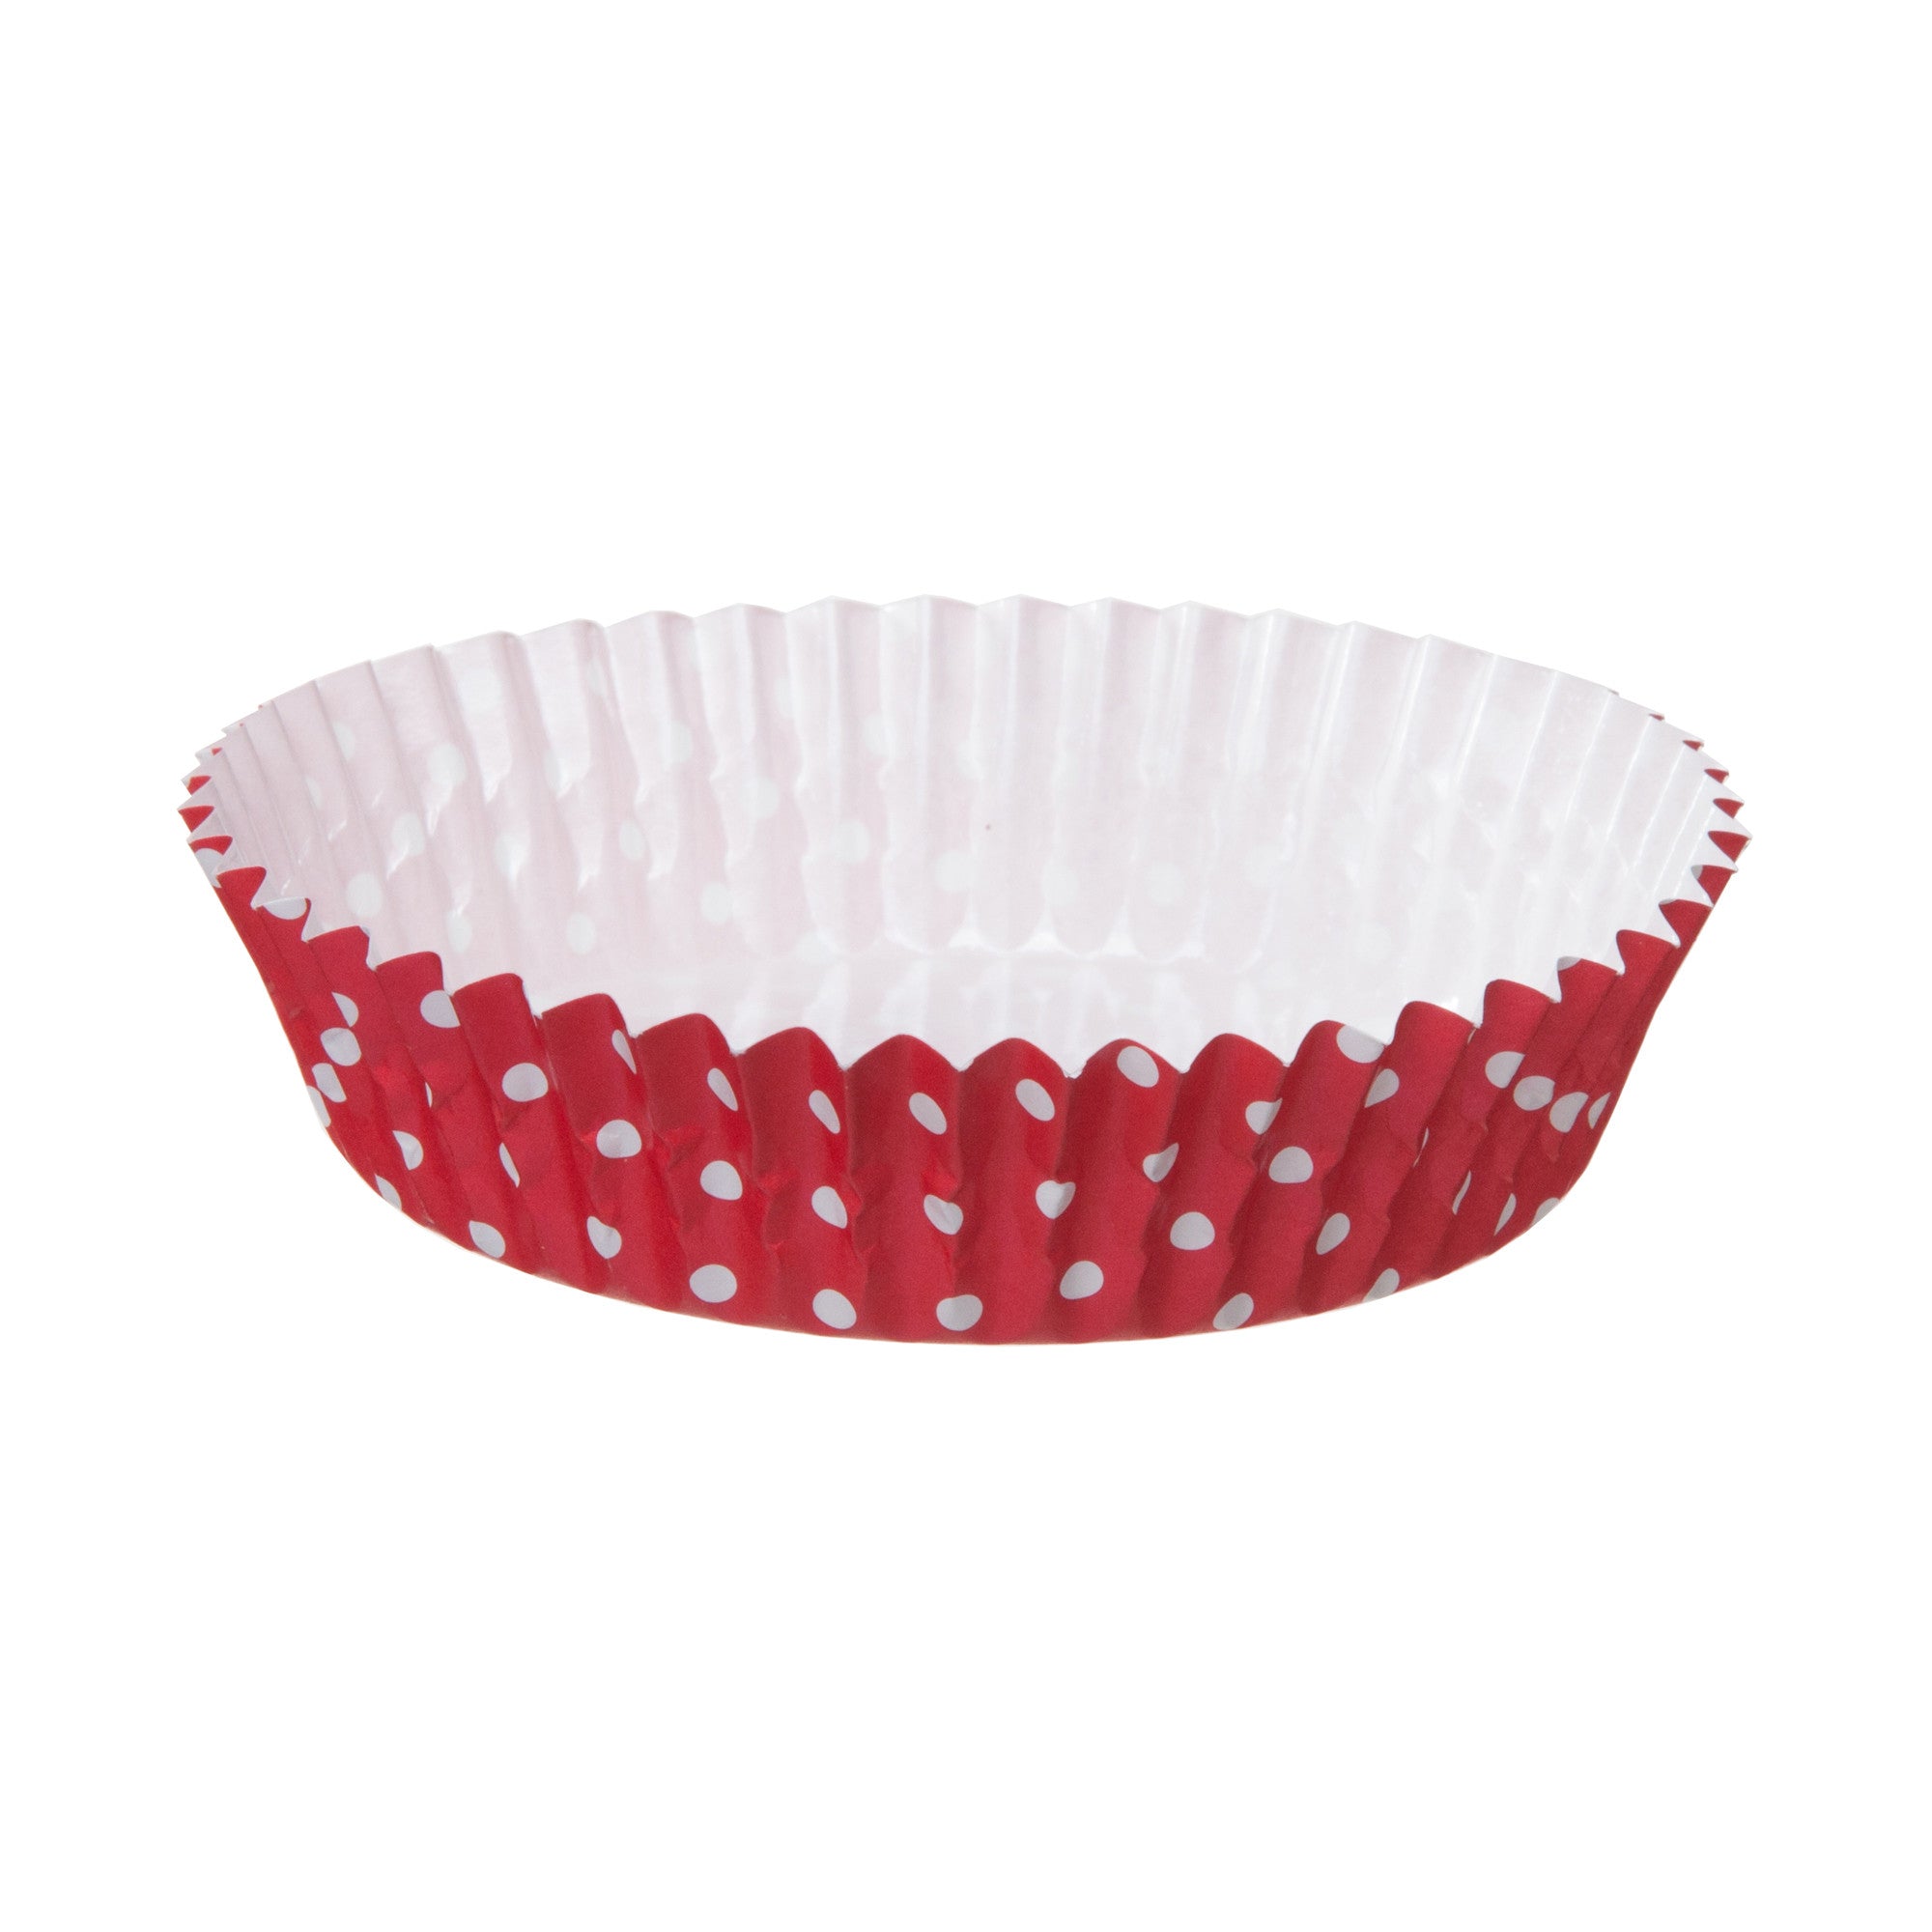 Ruffled Baking Cups, PTC10030WDRB - Welcome Home Brands